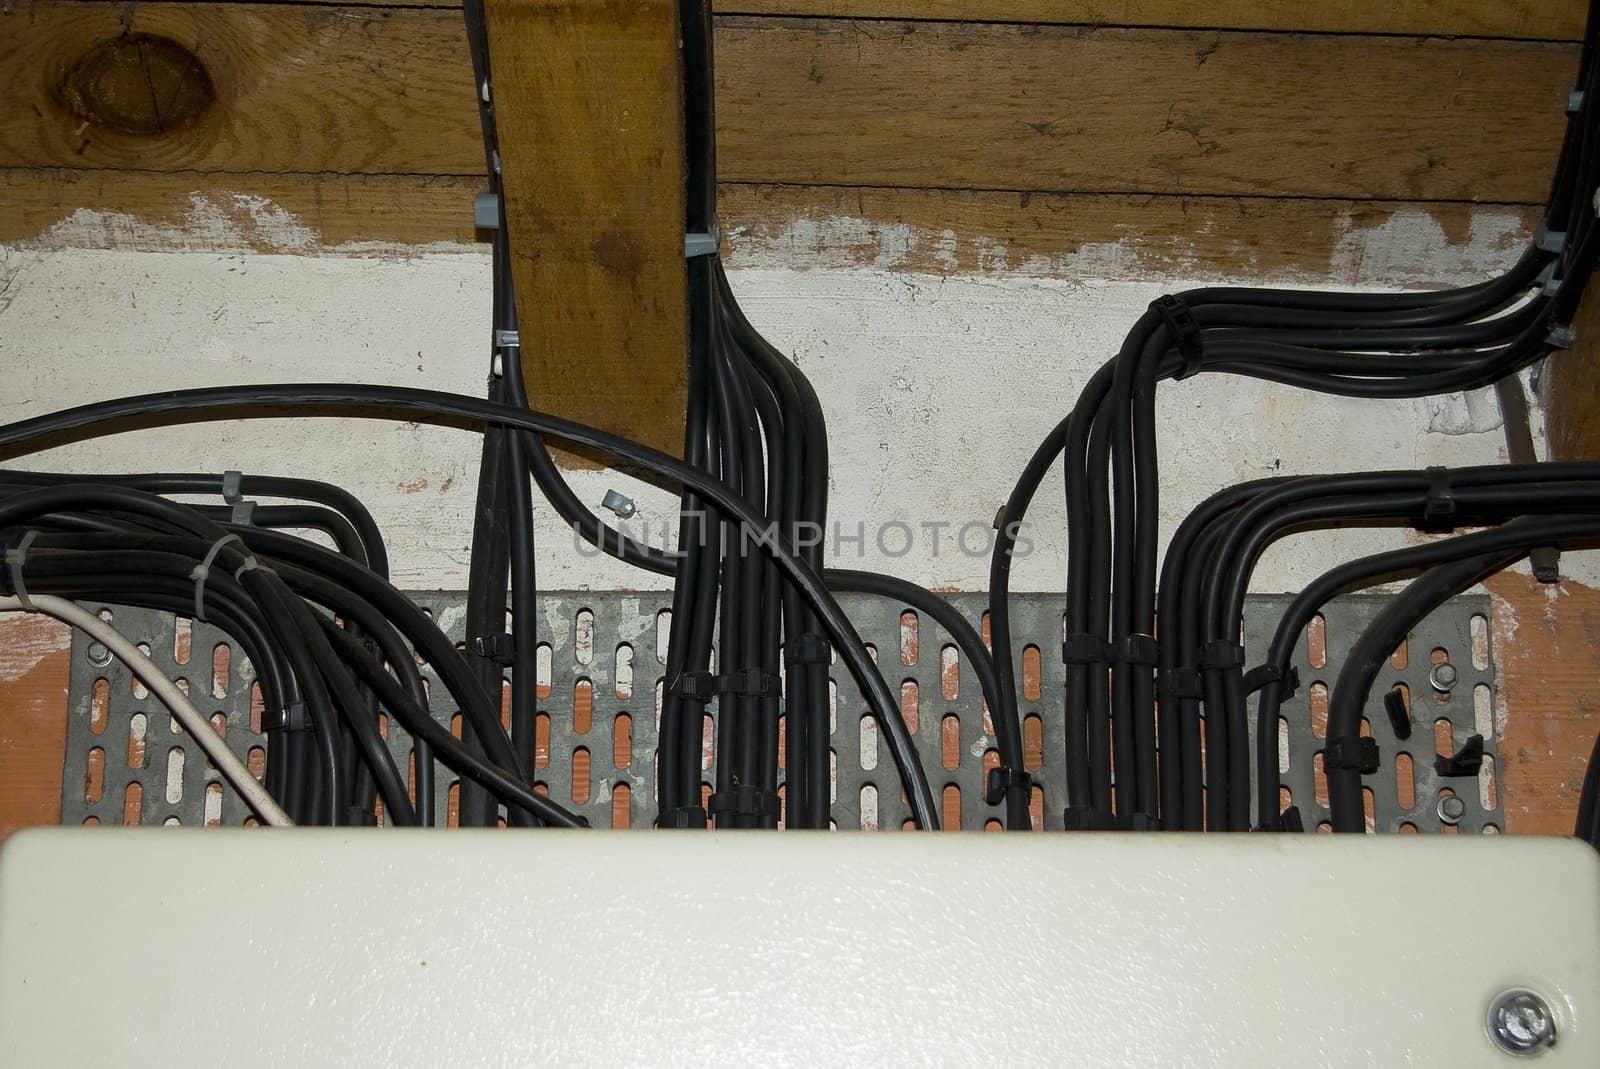 Start of some black electrical cables by shkyo30